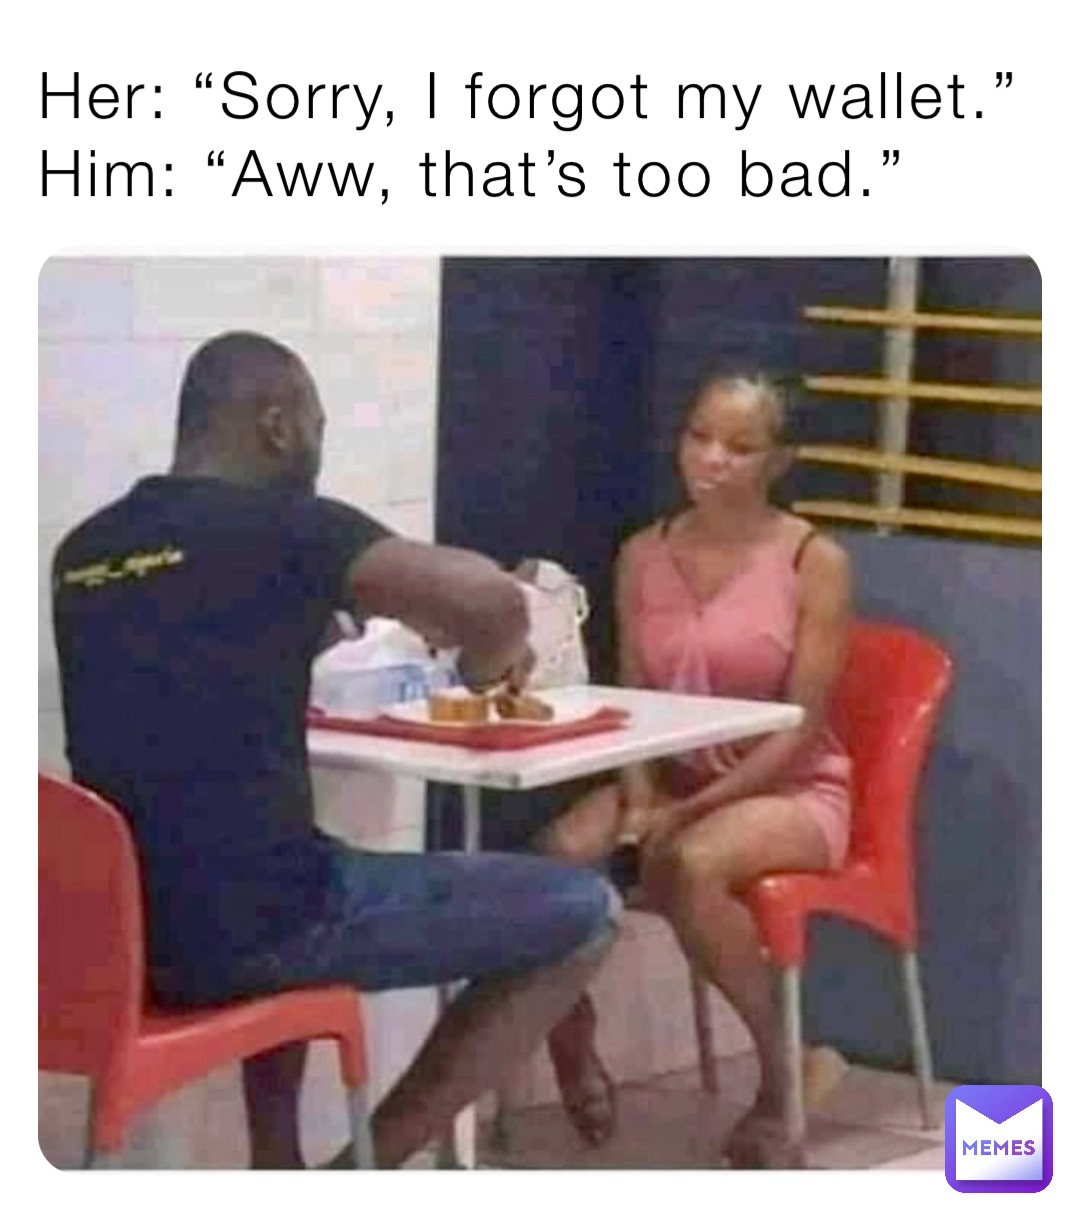 Her: “Sorry, I forgot my wallet.”
Him: “Aww, that’s too bad.”